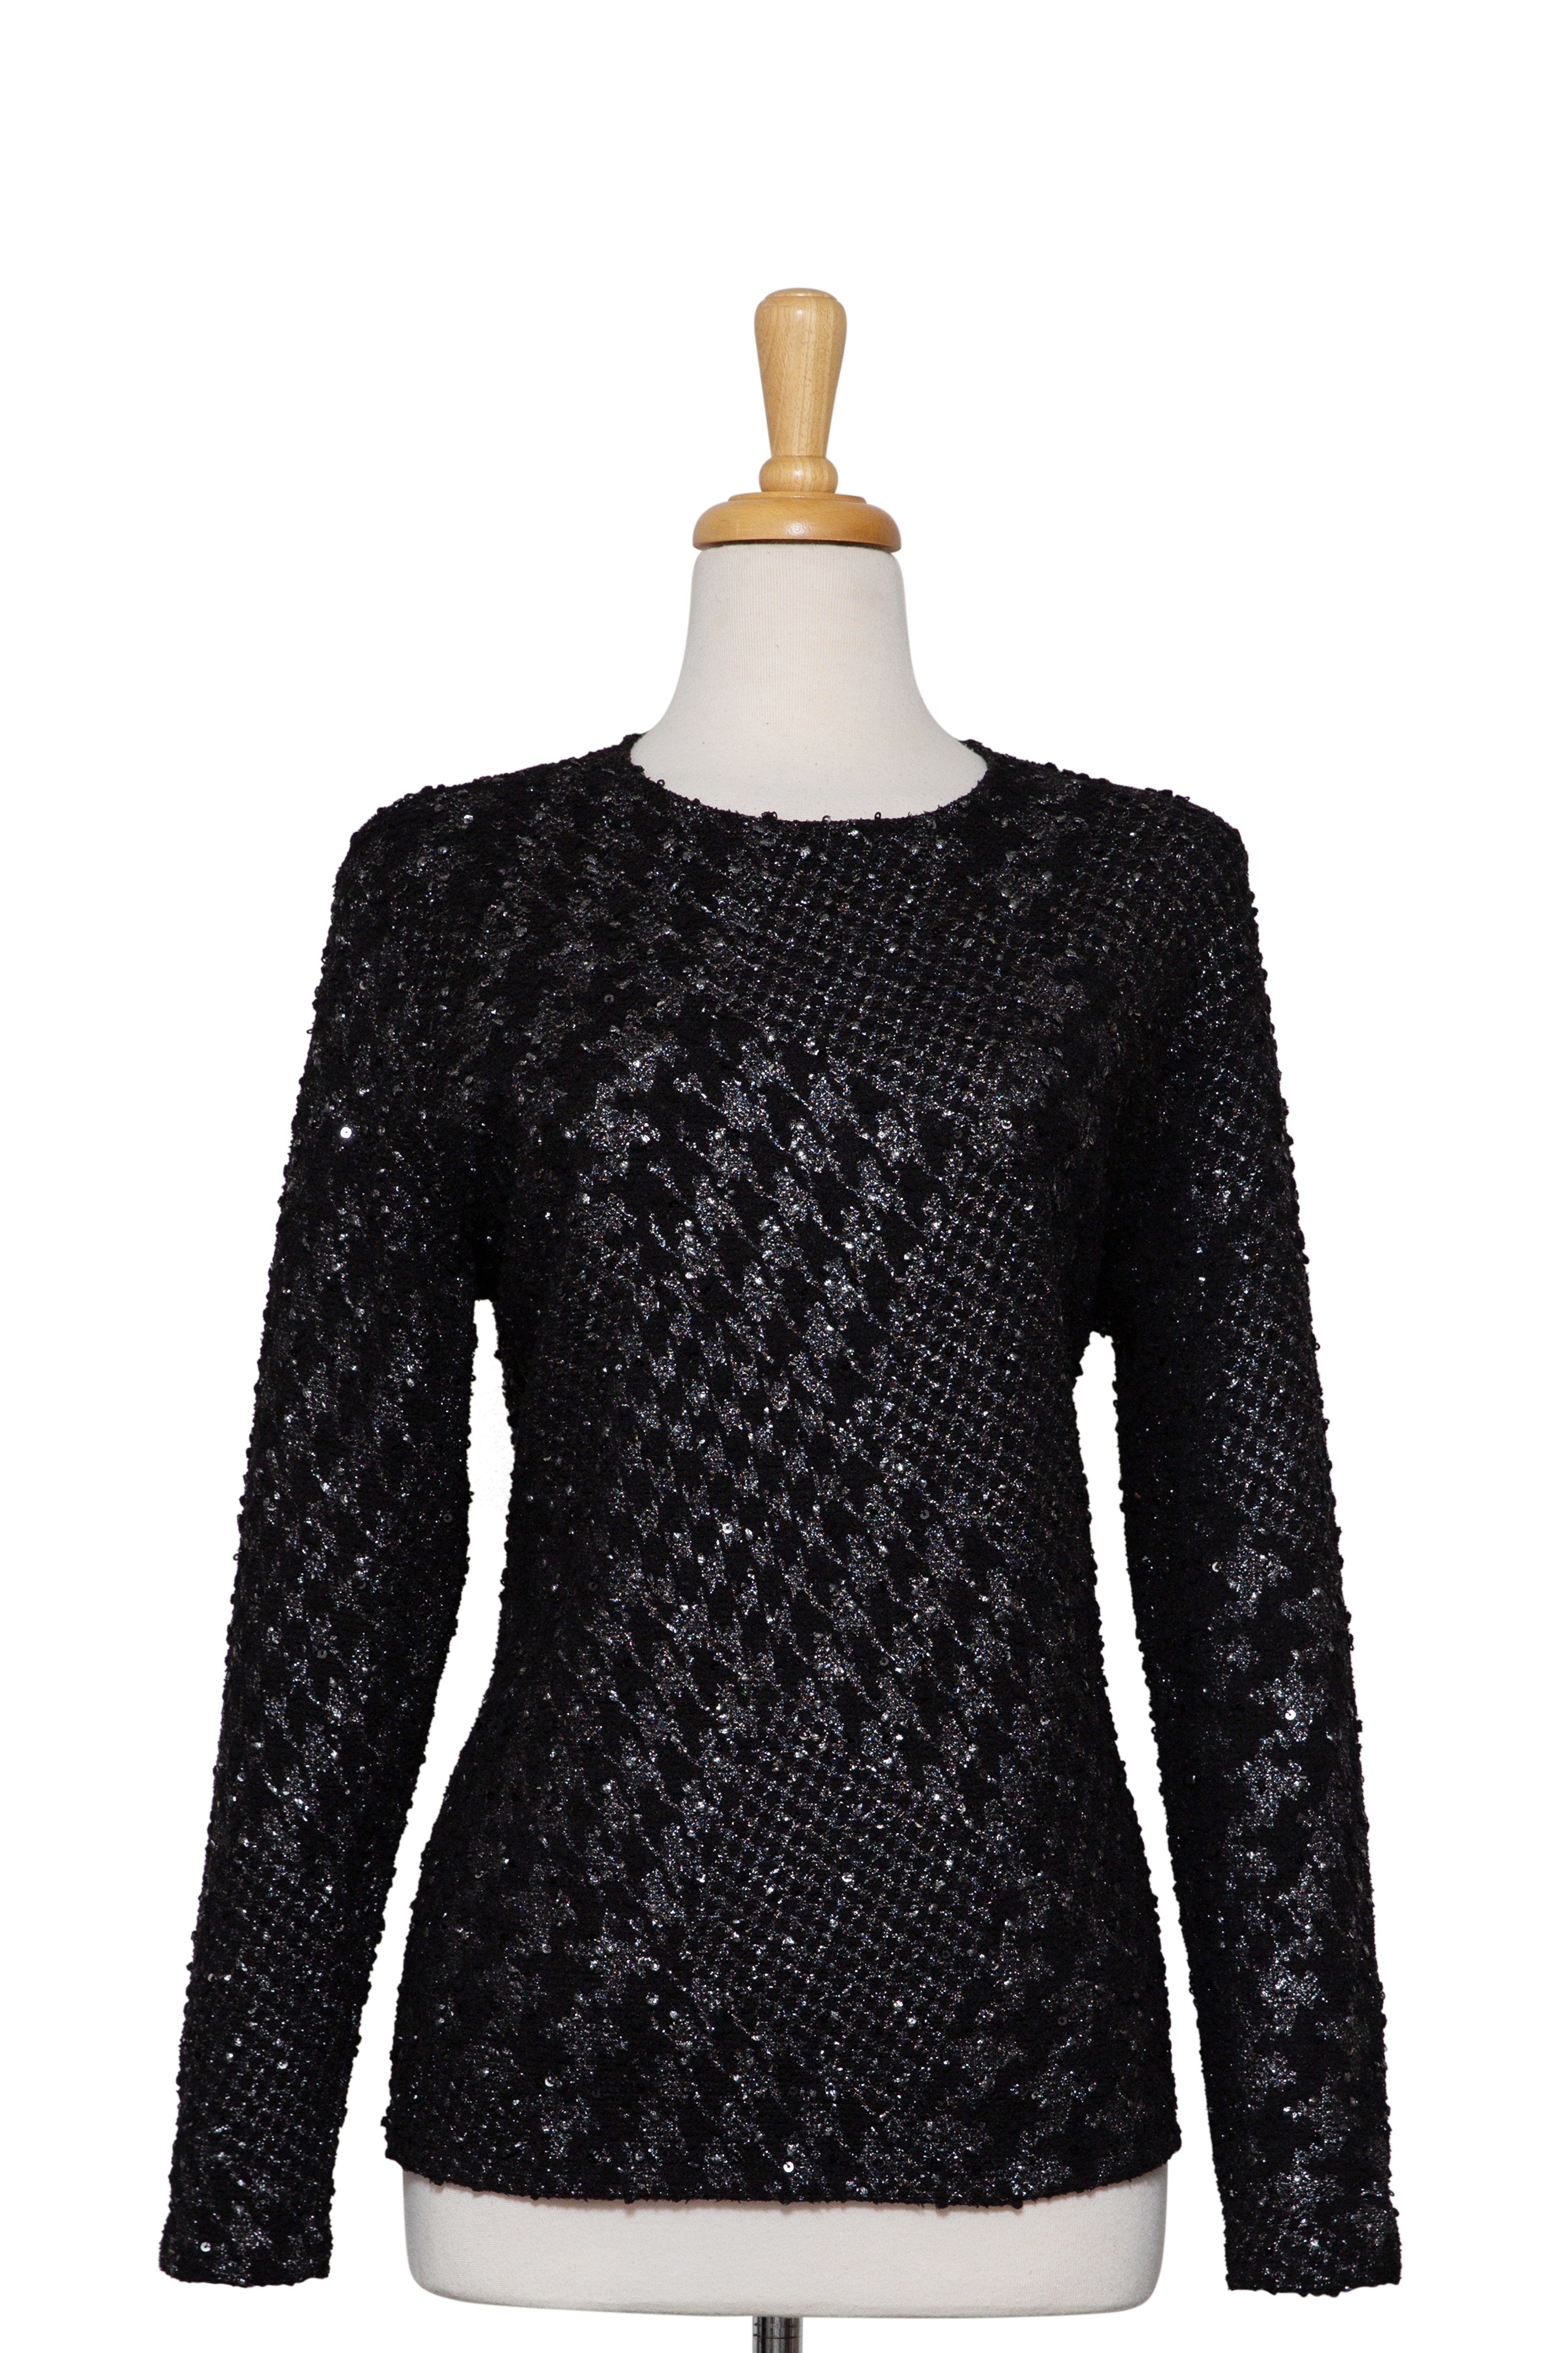 Black and Silver Metallic with Knit Sequins Sleeve Top Long Dispersed Boucle